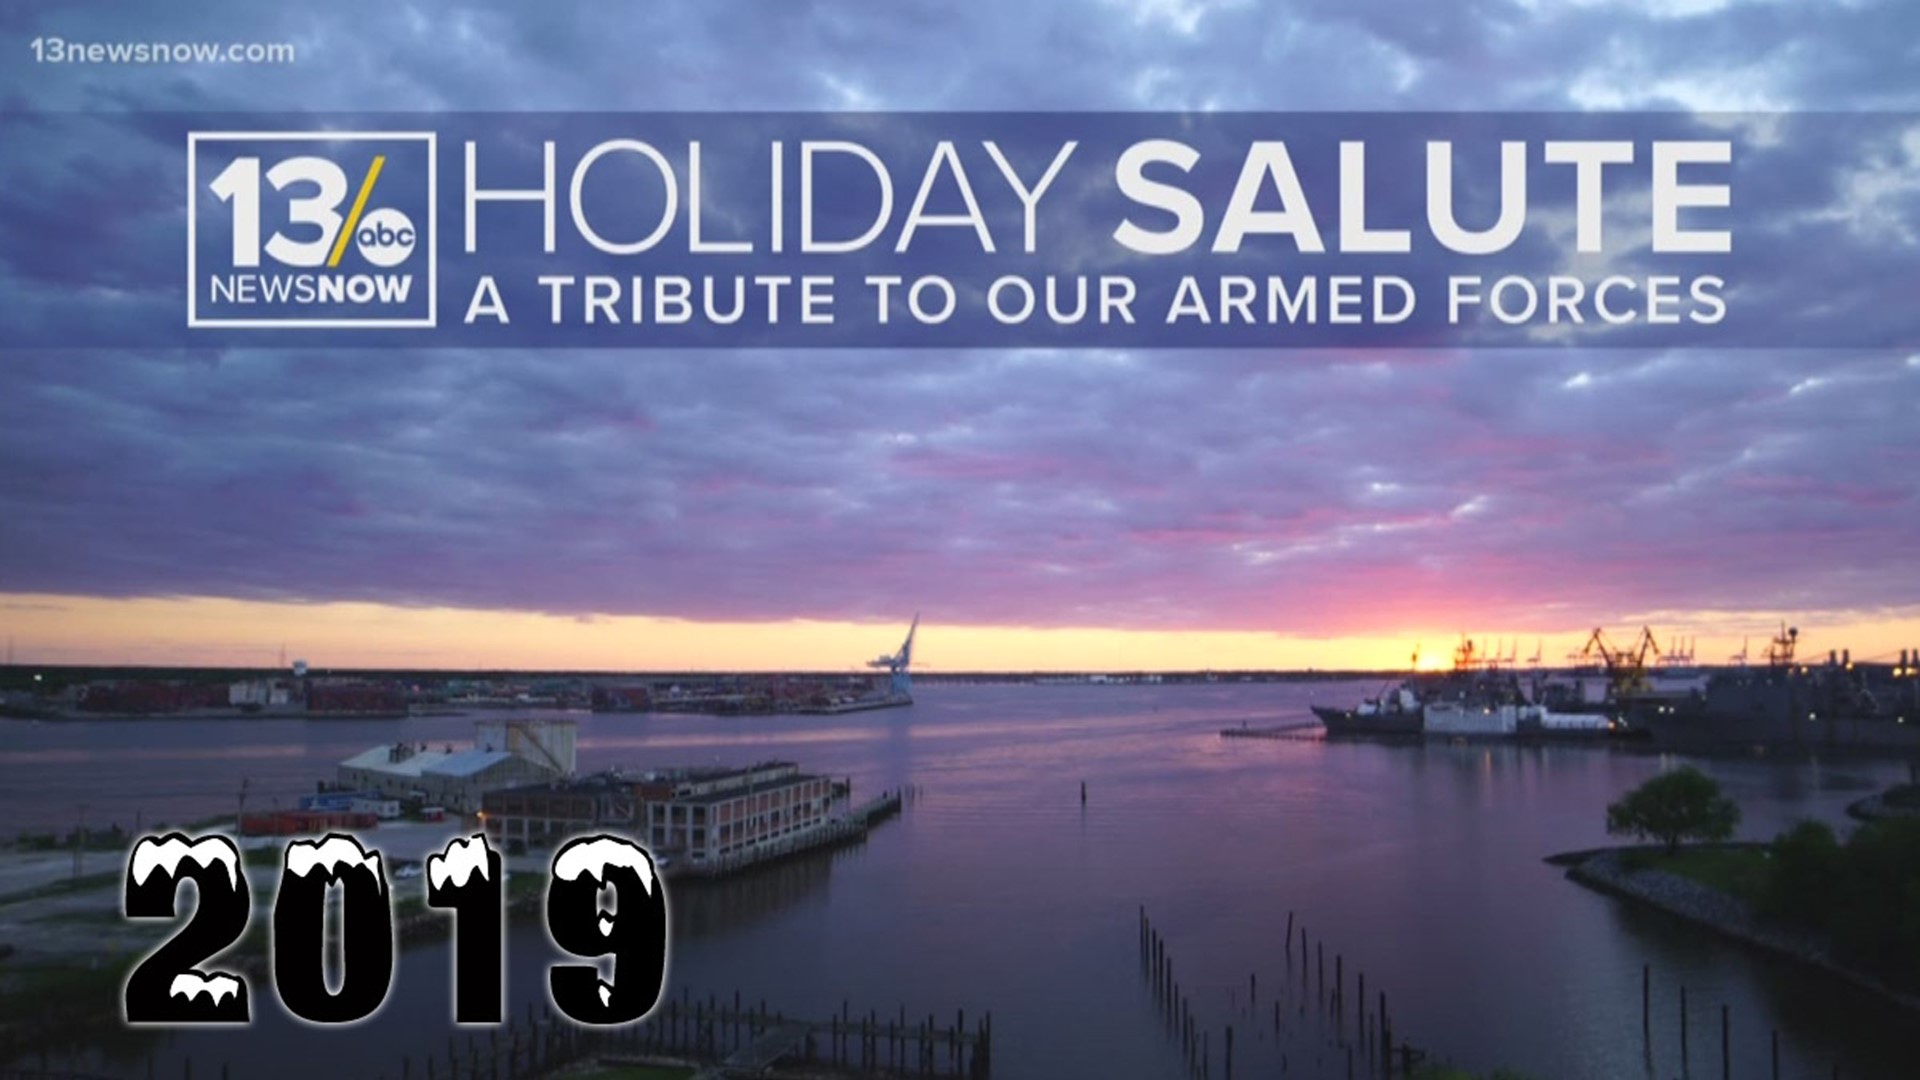 It's our station's annual tradition that recognizes service members and military families across Hampton Roads: the 34th Annual Holiday Salute!